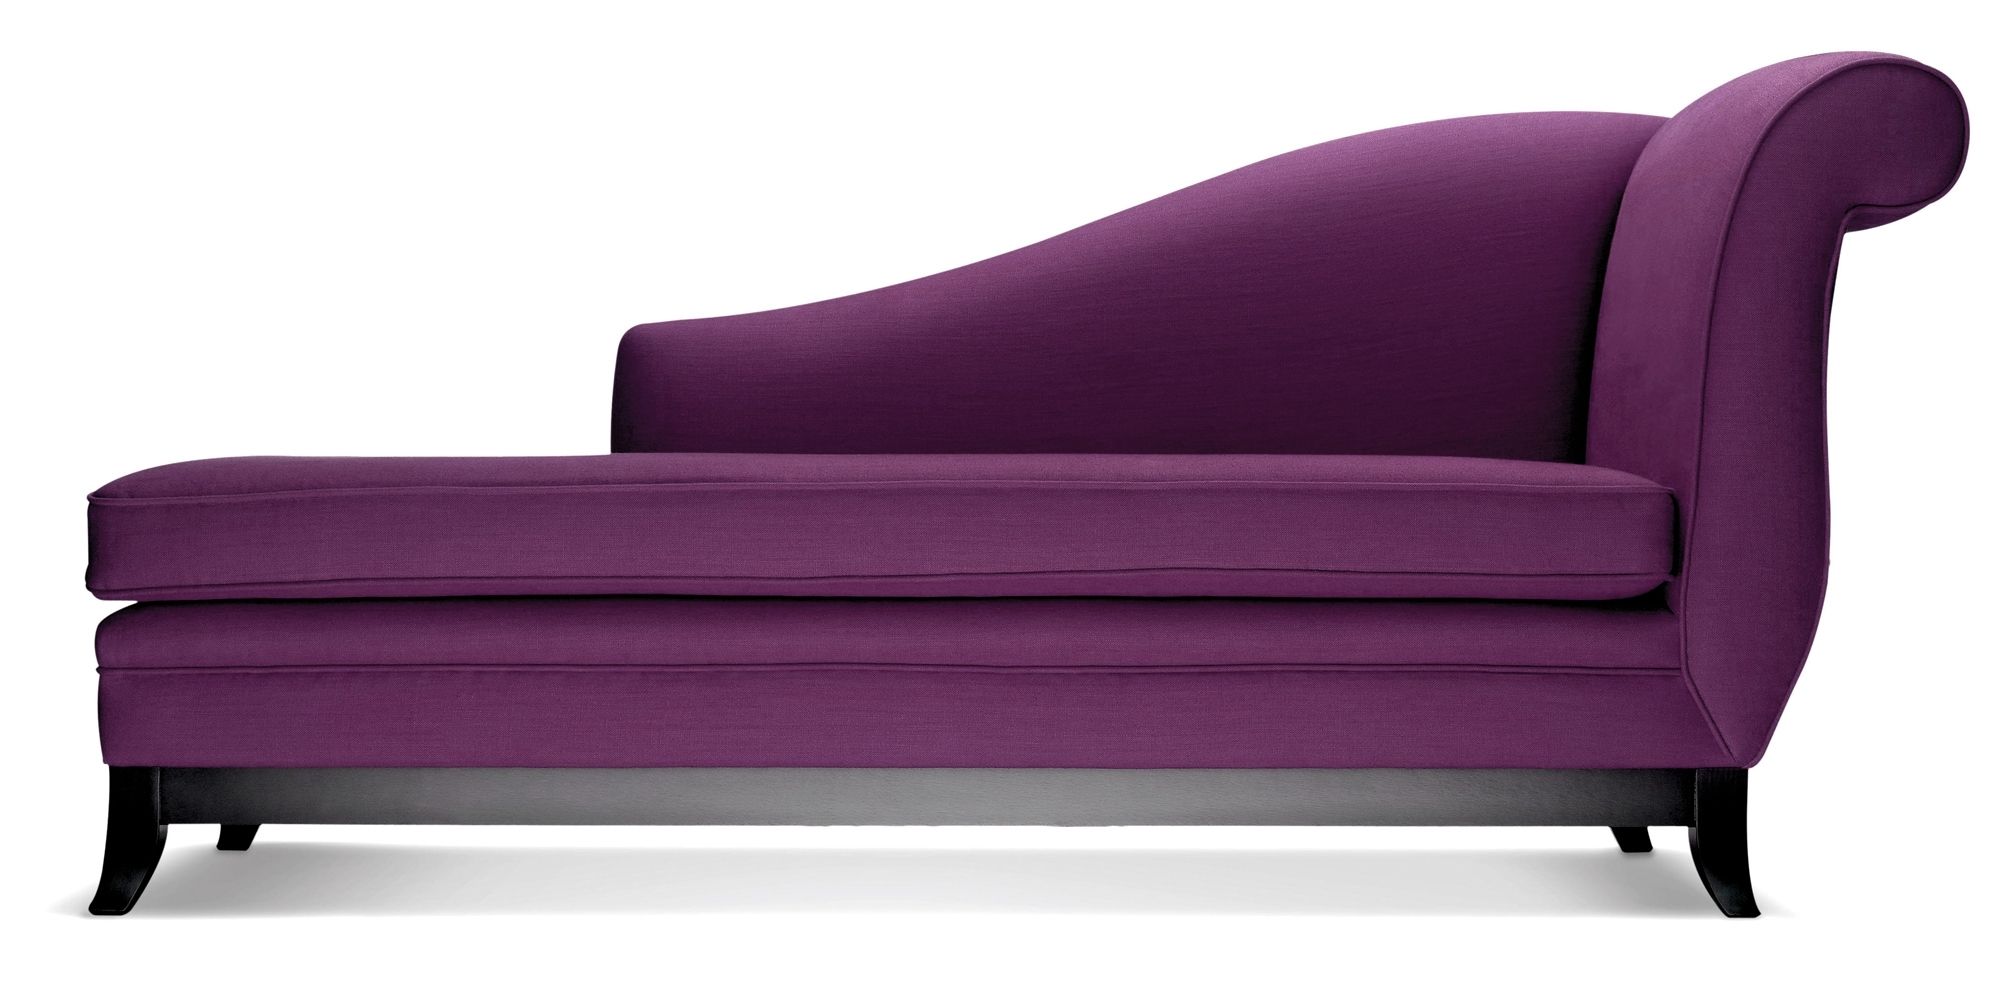 Furniture: Luxury Purple Leather Chaise Lounge For Elegant Family With Famous Purple Chaise Lounges (View 6 of 15)